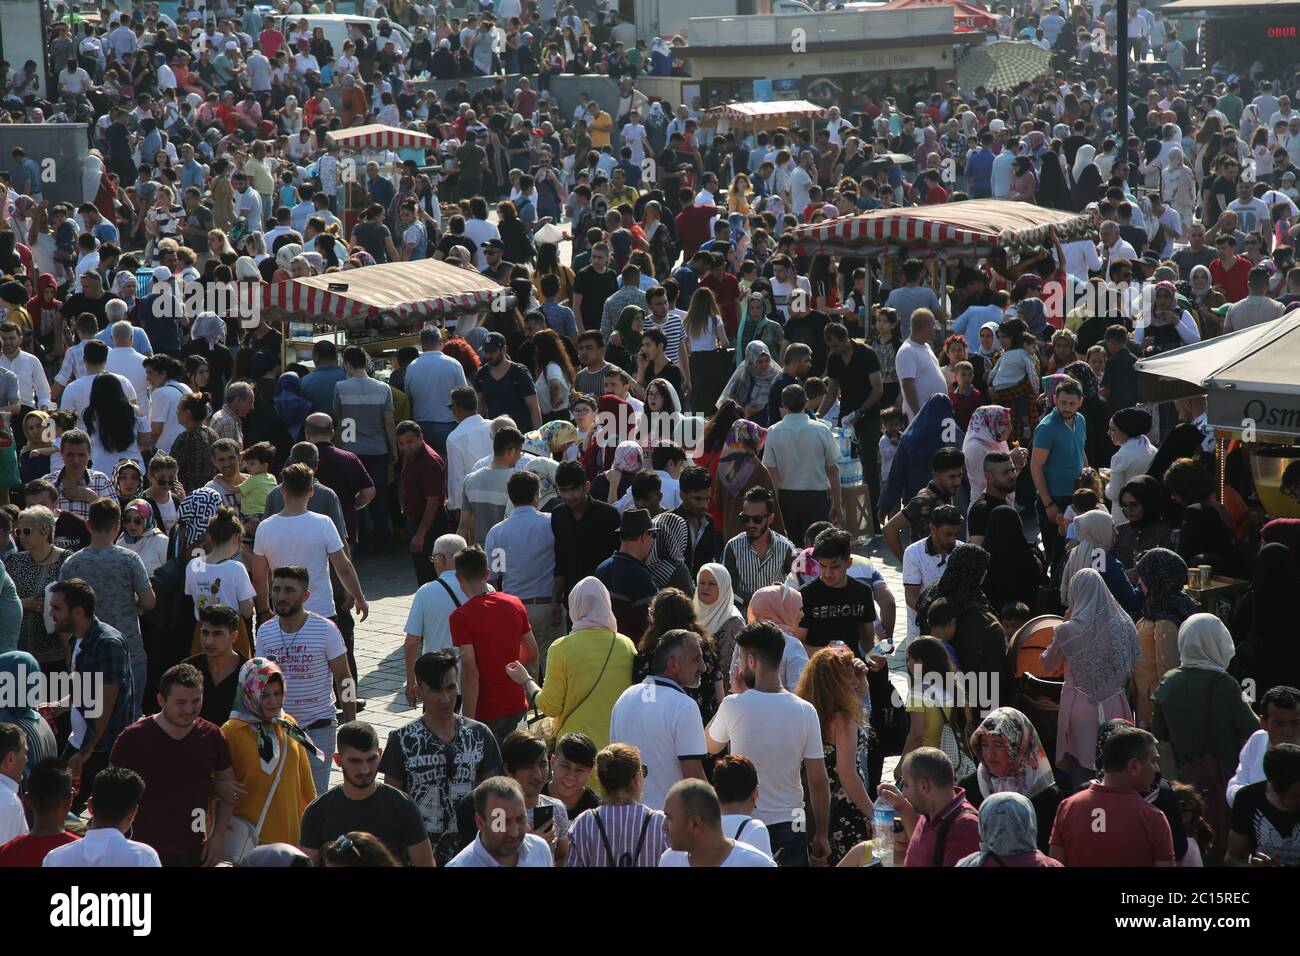 EMINONU, ISTANBUL, TURKEY; JUNE 26, 2018. People crowd walking through street. Crowds beside the Bosphorus, with mosque in background, in Istanbul. Stock Photo